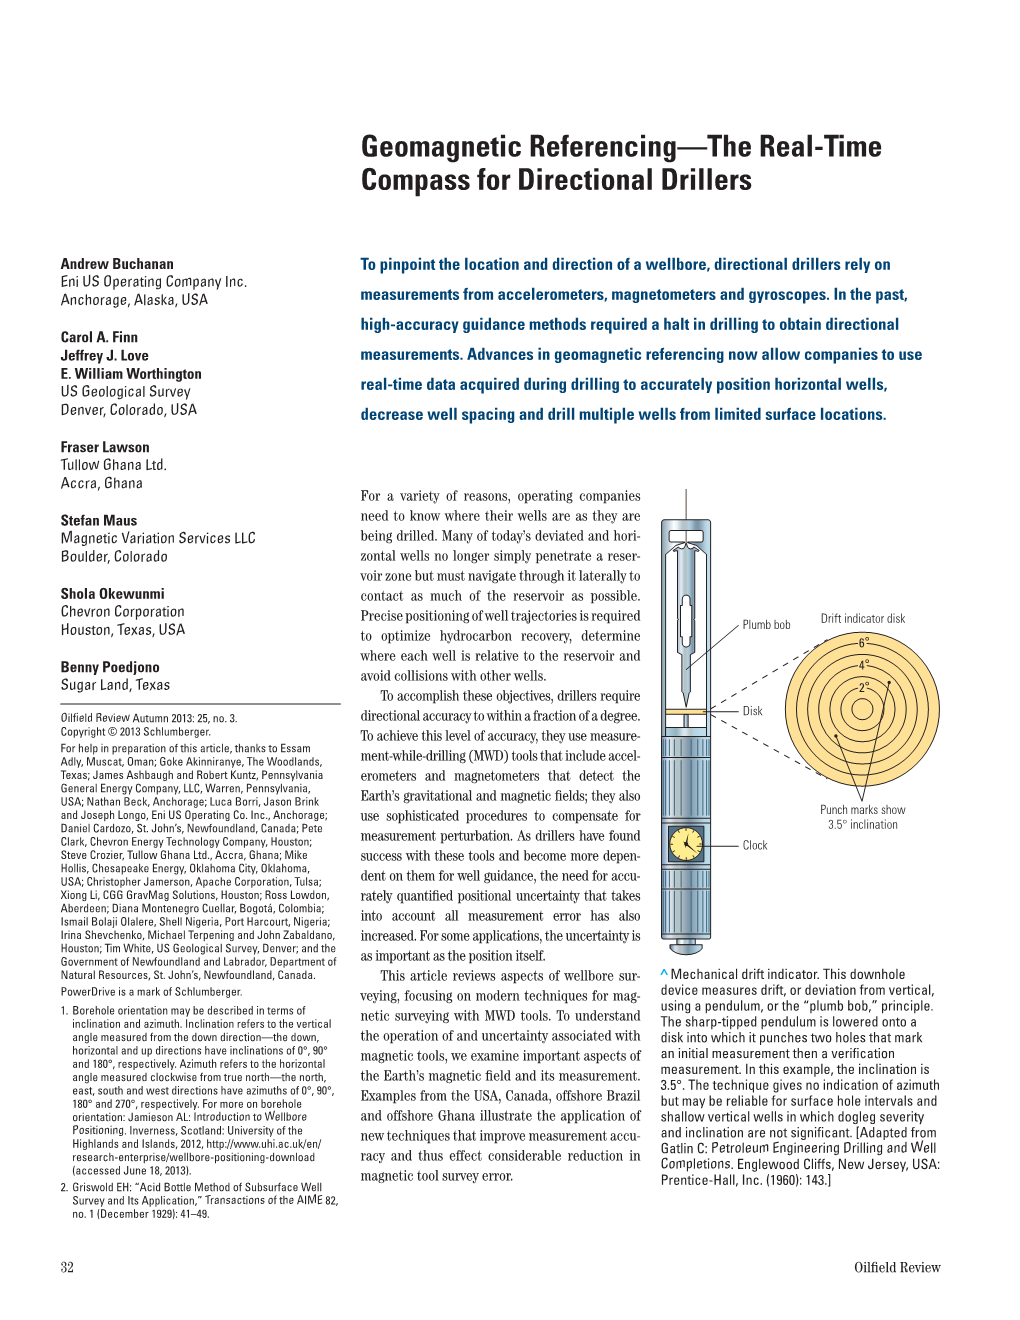 Geomagnetic Referencing—The Real-Time Compass for Directional Drillers